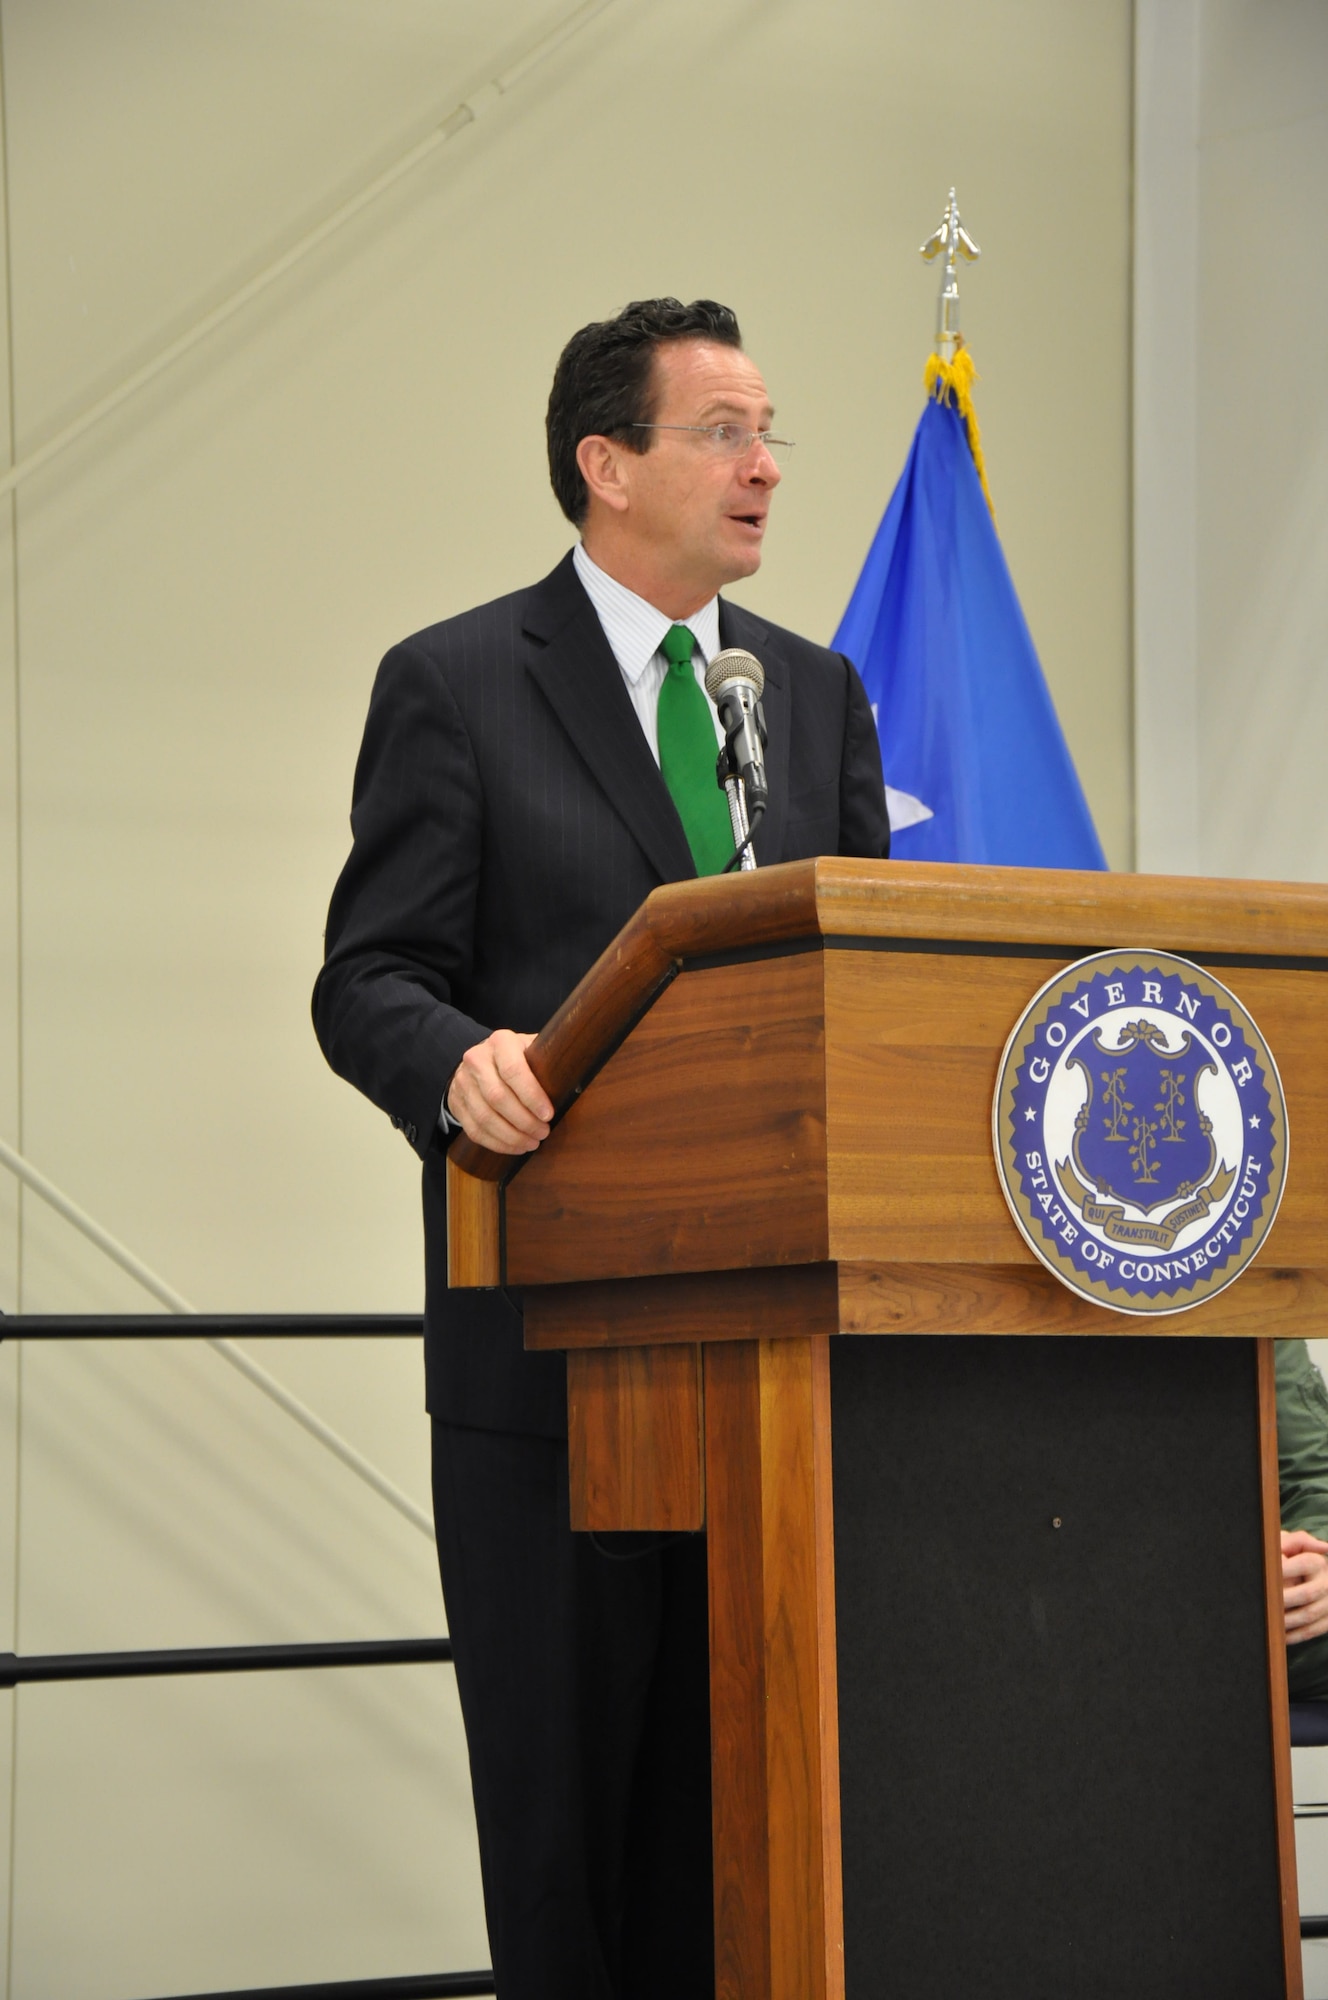 Connecticut Governor Dannel P. Malloy addresses guests and members of the 103rd Airlift Wing, Connecticut Air National Guard, during a ribbon cutting ceremony April 28, 2011, to mark the official opening of the Centralized Repair Facility at Bradley Air National Guard Base, East Granby, Conn. (Photo by Sgt. 1st Class Debbi Newton, State Public Affairs NCO)